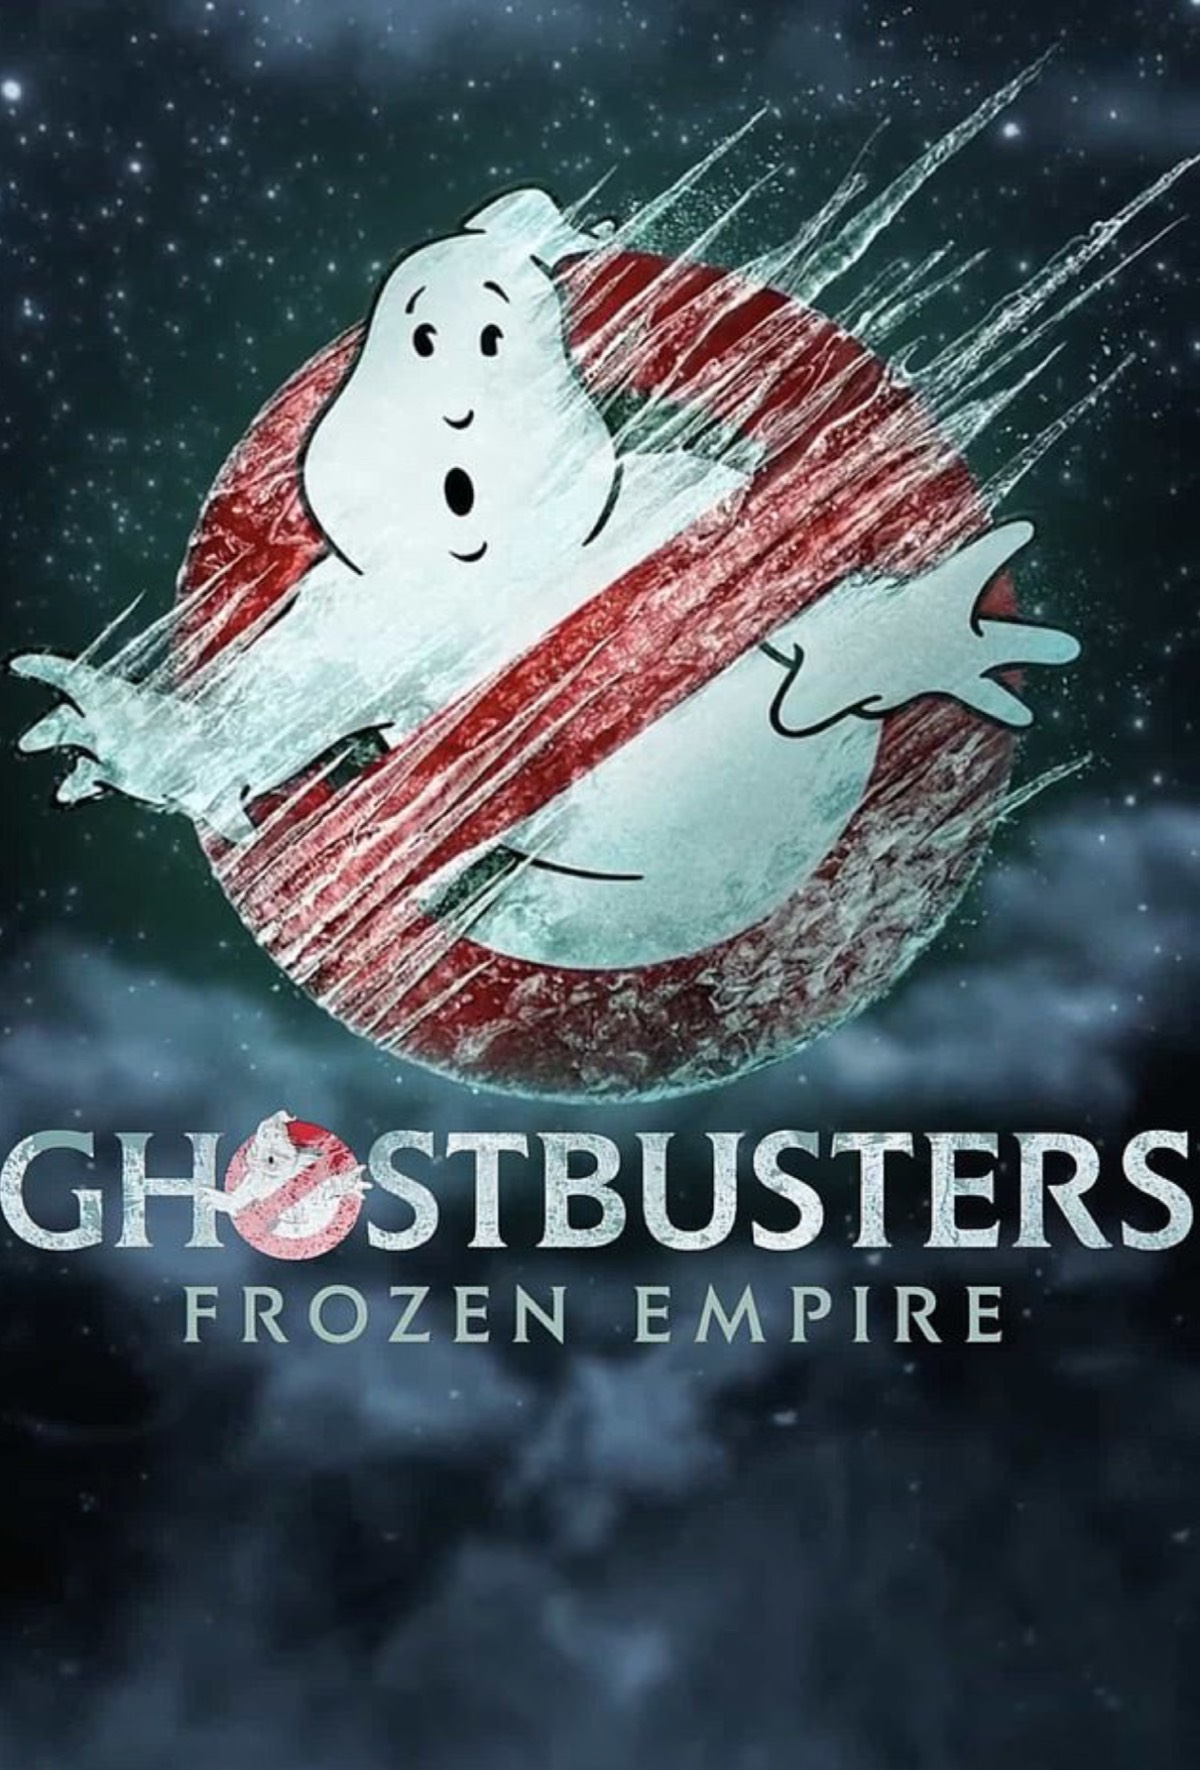 Ghostbusters: Frozen Empire release date, cast and trailer